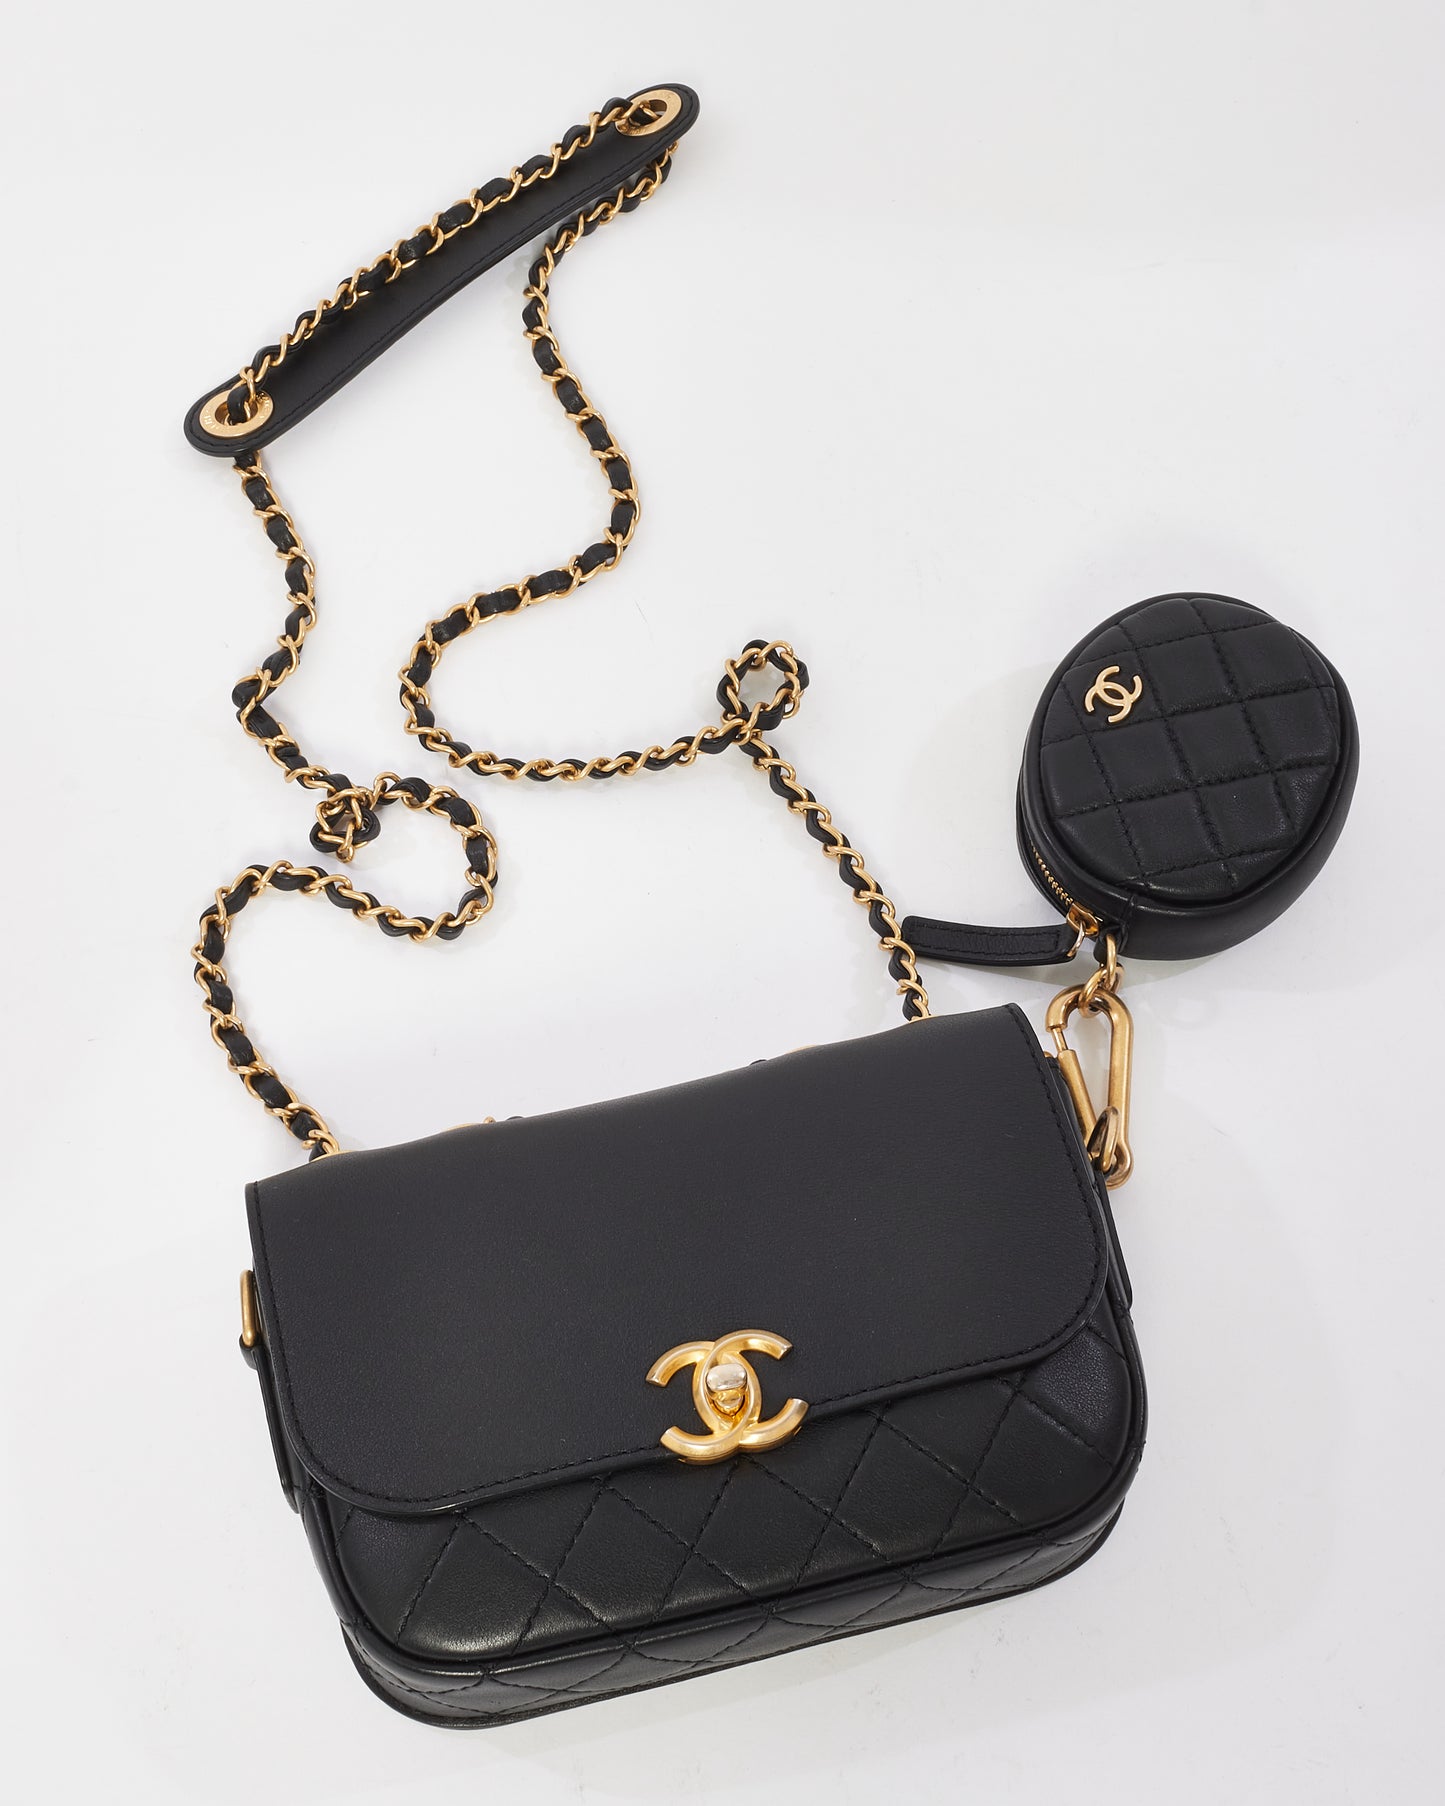 Chanel Black Calfskin Leather Multi Pouching Flap Bag With Coin Purse